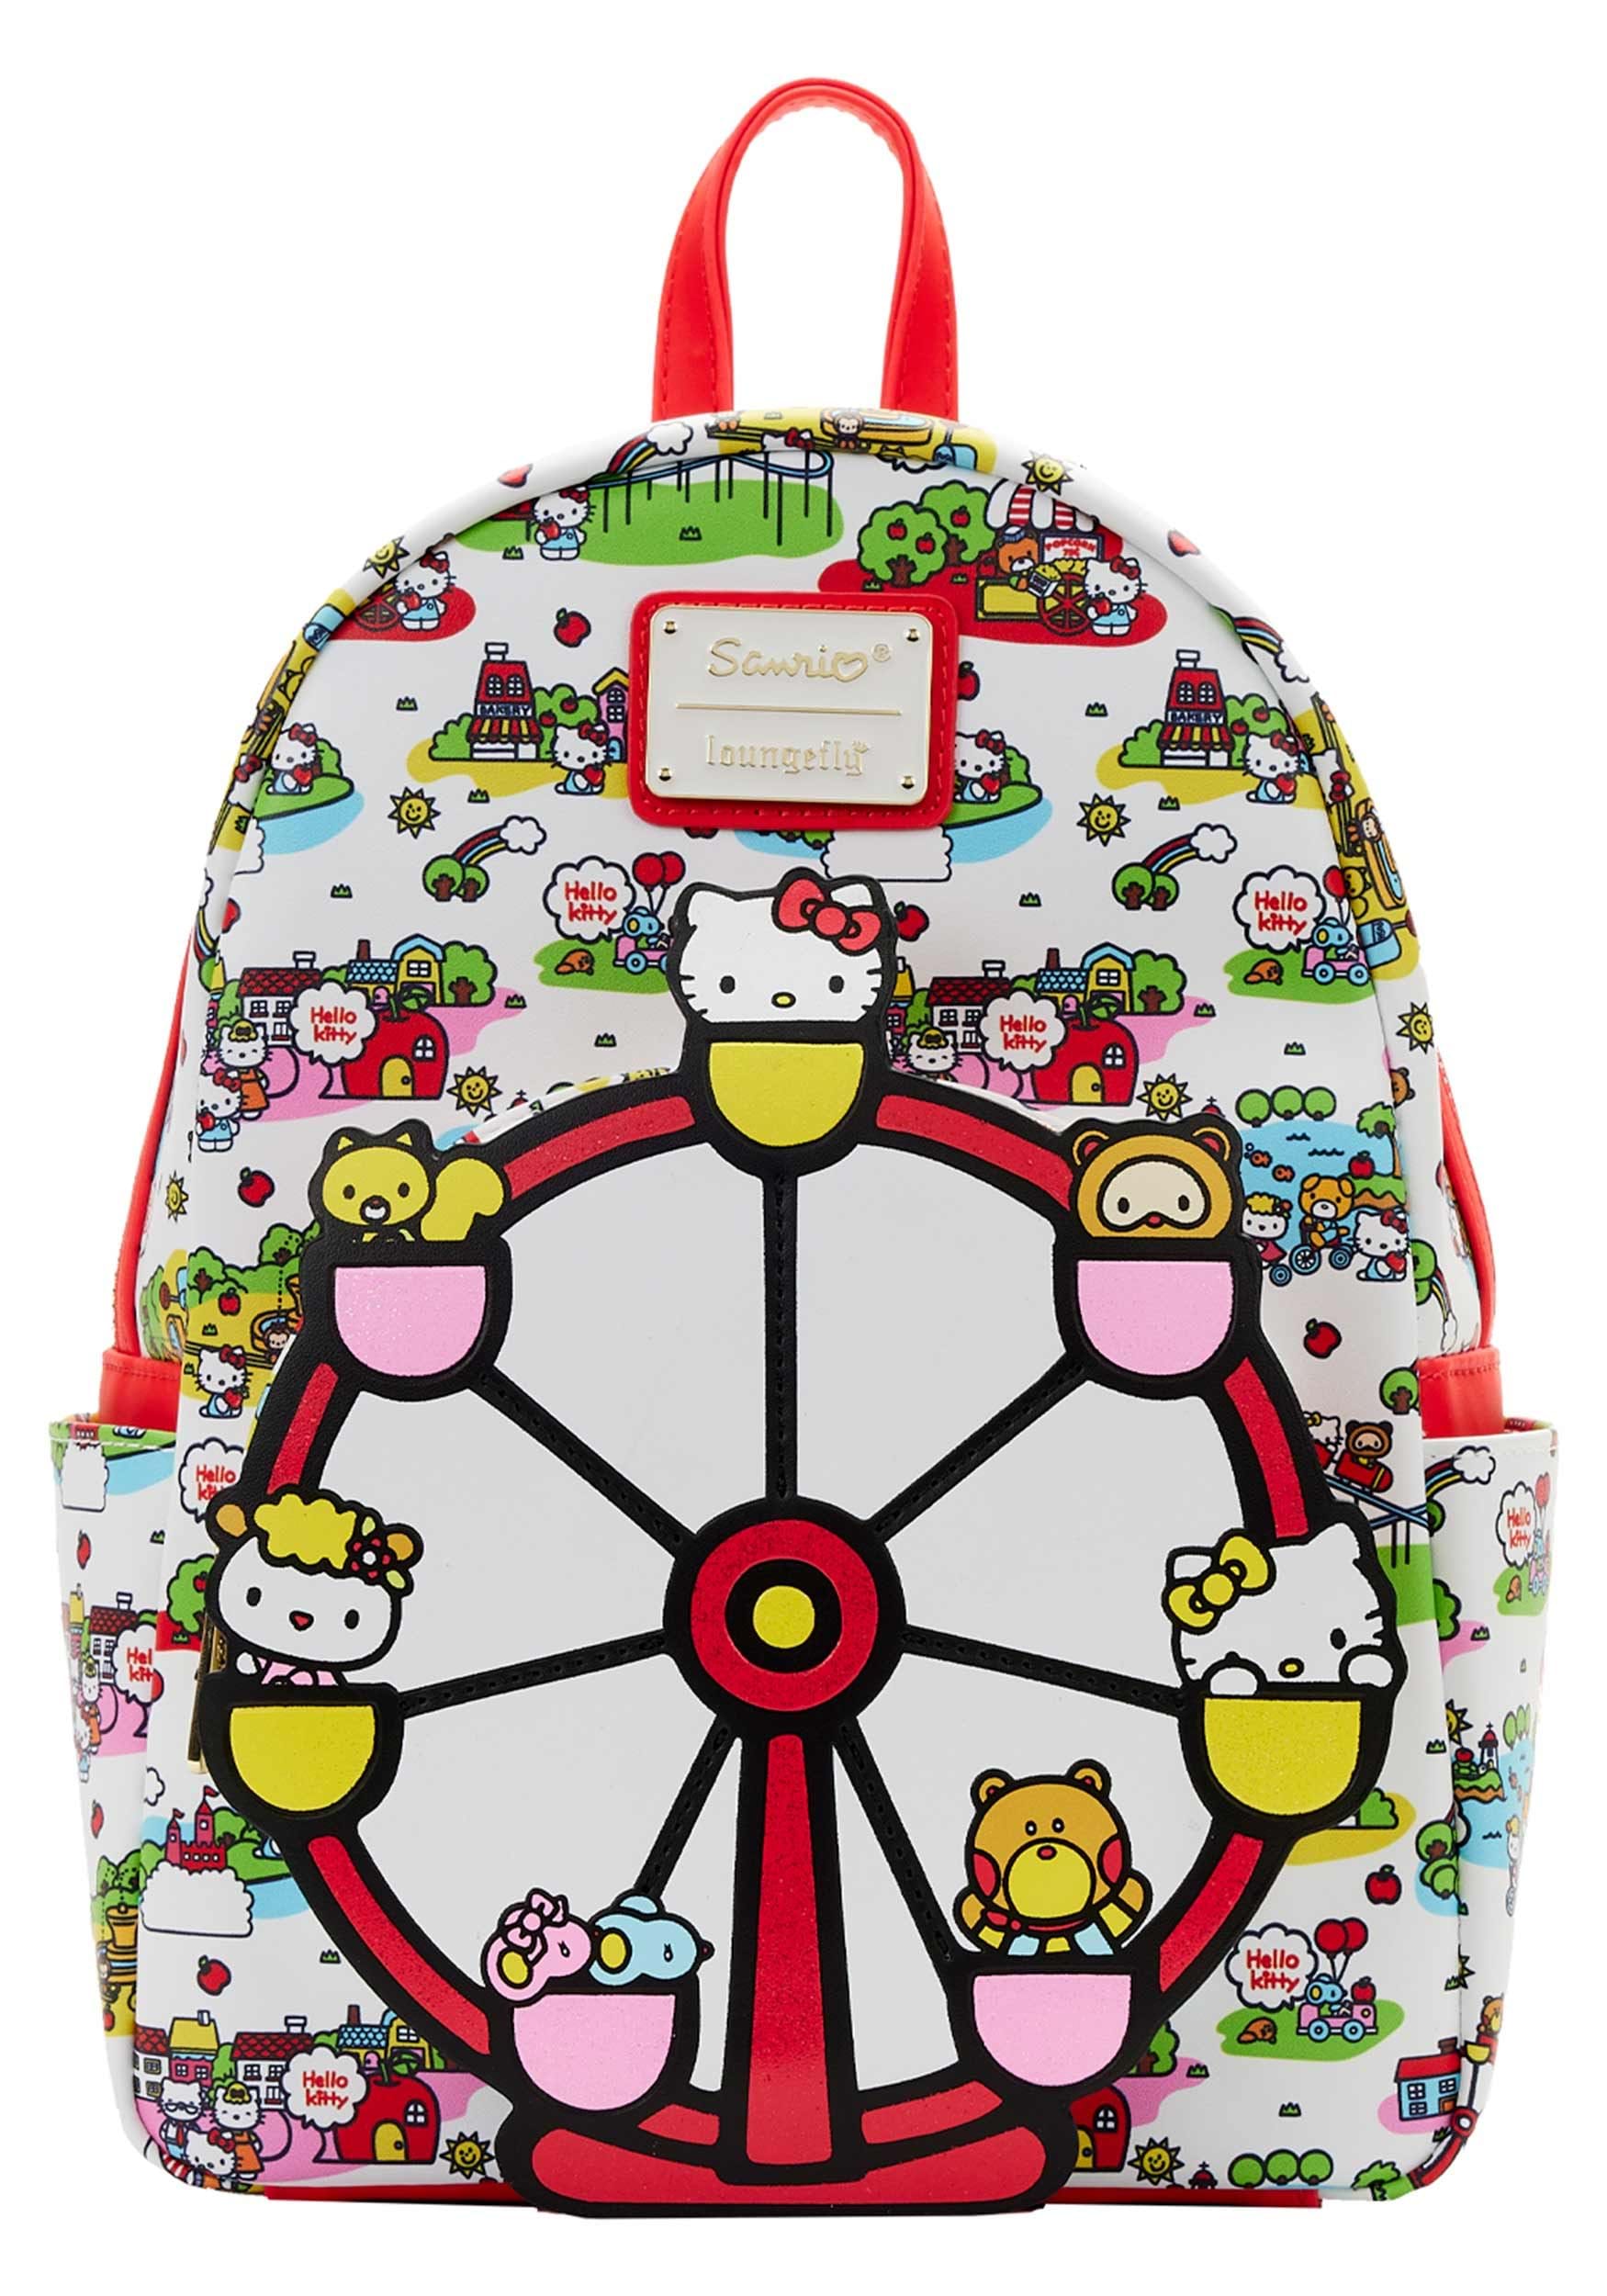 https://images.fun.com/products/89856/1-1/loungefly-hello-kitty-and-friends-carnival-mini-backpack.jpg